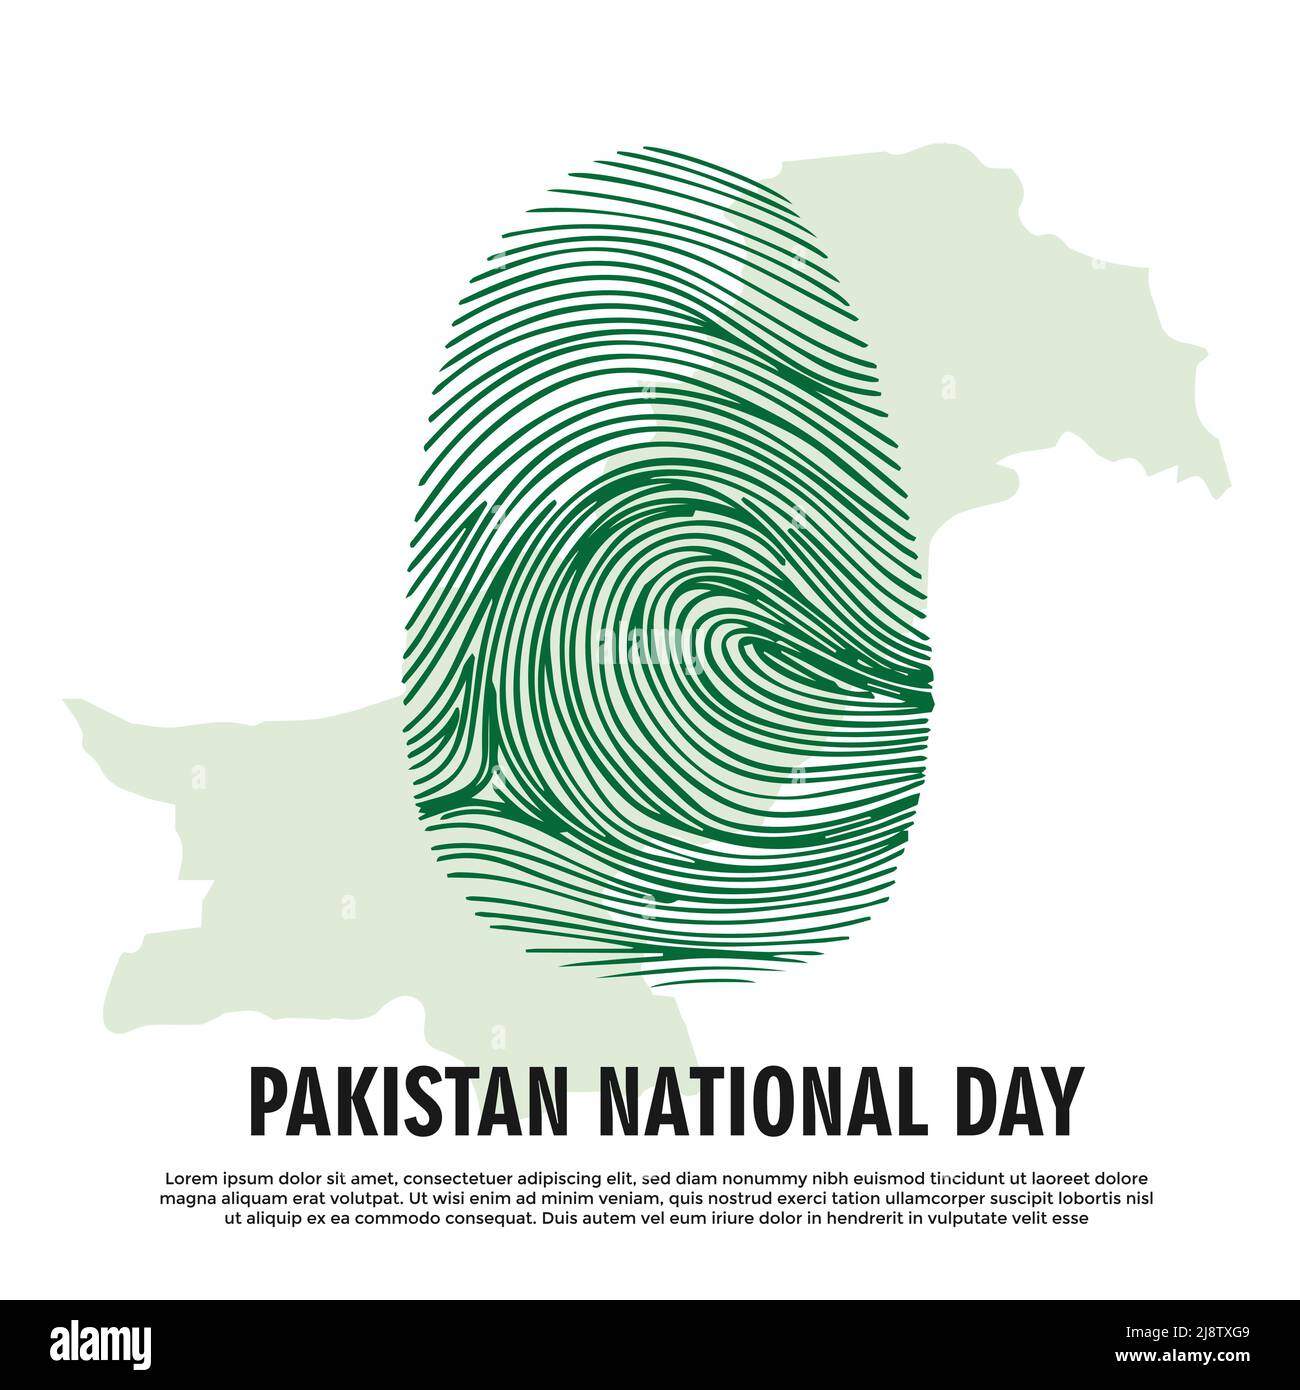 My identity is Pakistan National Day celebration with thumb lines on Pakistan map Stock Vector